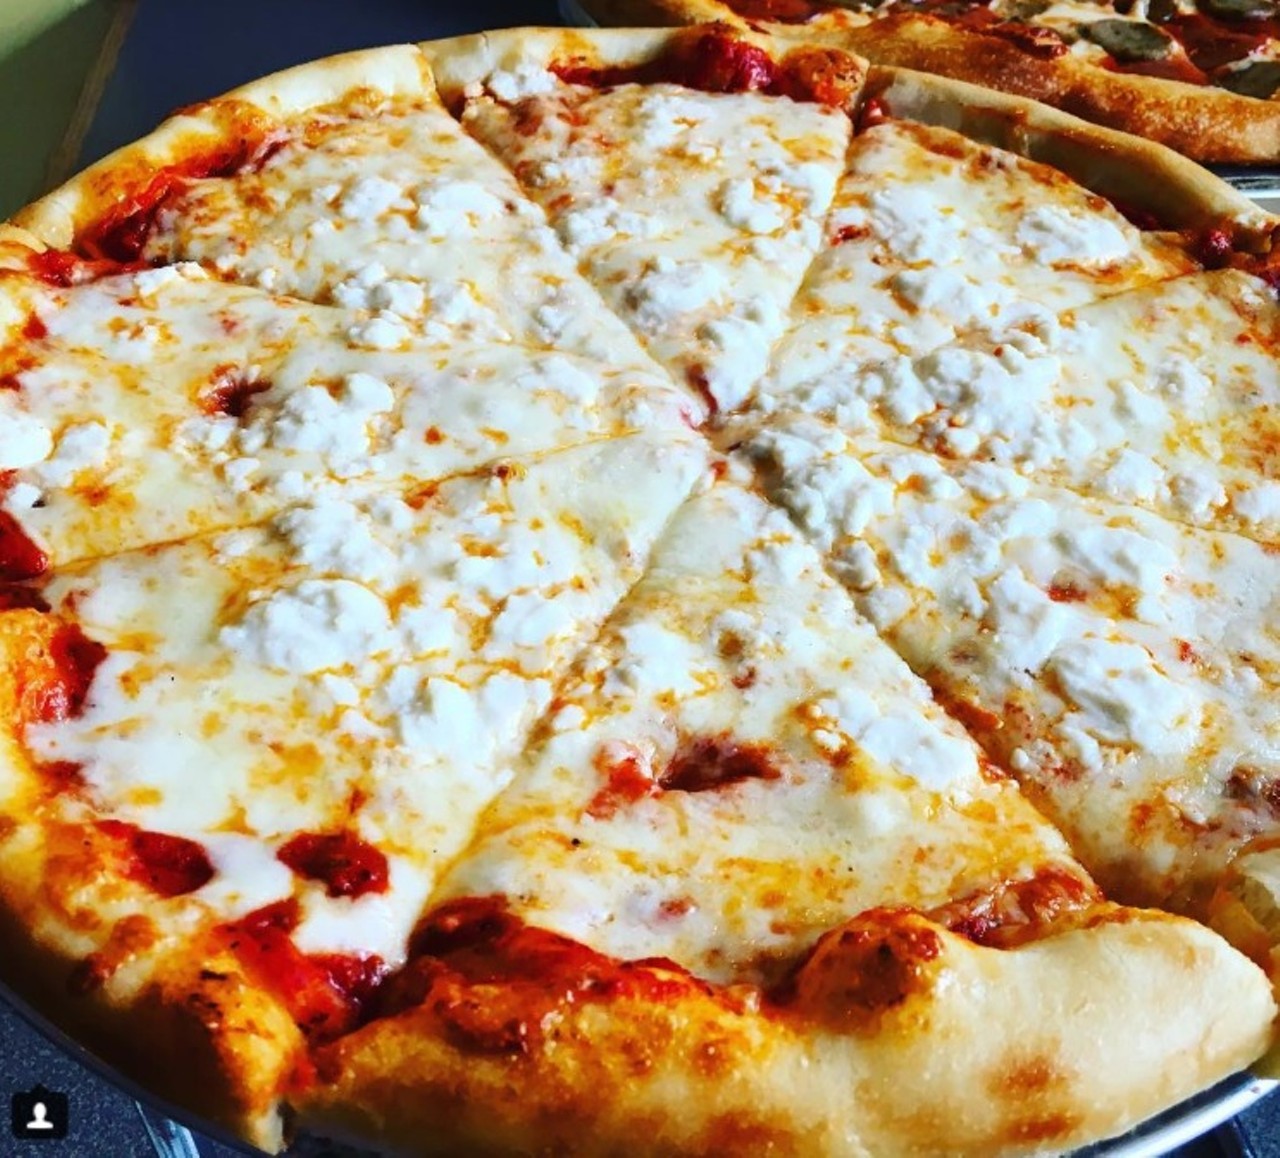 Dewey's Pizza
Locations in University City, Webster Groves, Kirkwood, Edwardsville, St. Charles and Ellisville
This small Midwestern chain has pizza you don't want to miss. You can choose one of Dewey's creative combos or make your own and decide between white and red sauce. Dewey's offers gluten-free crust, too. Photo courtesy of Instagram / thefoodiefriend.